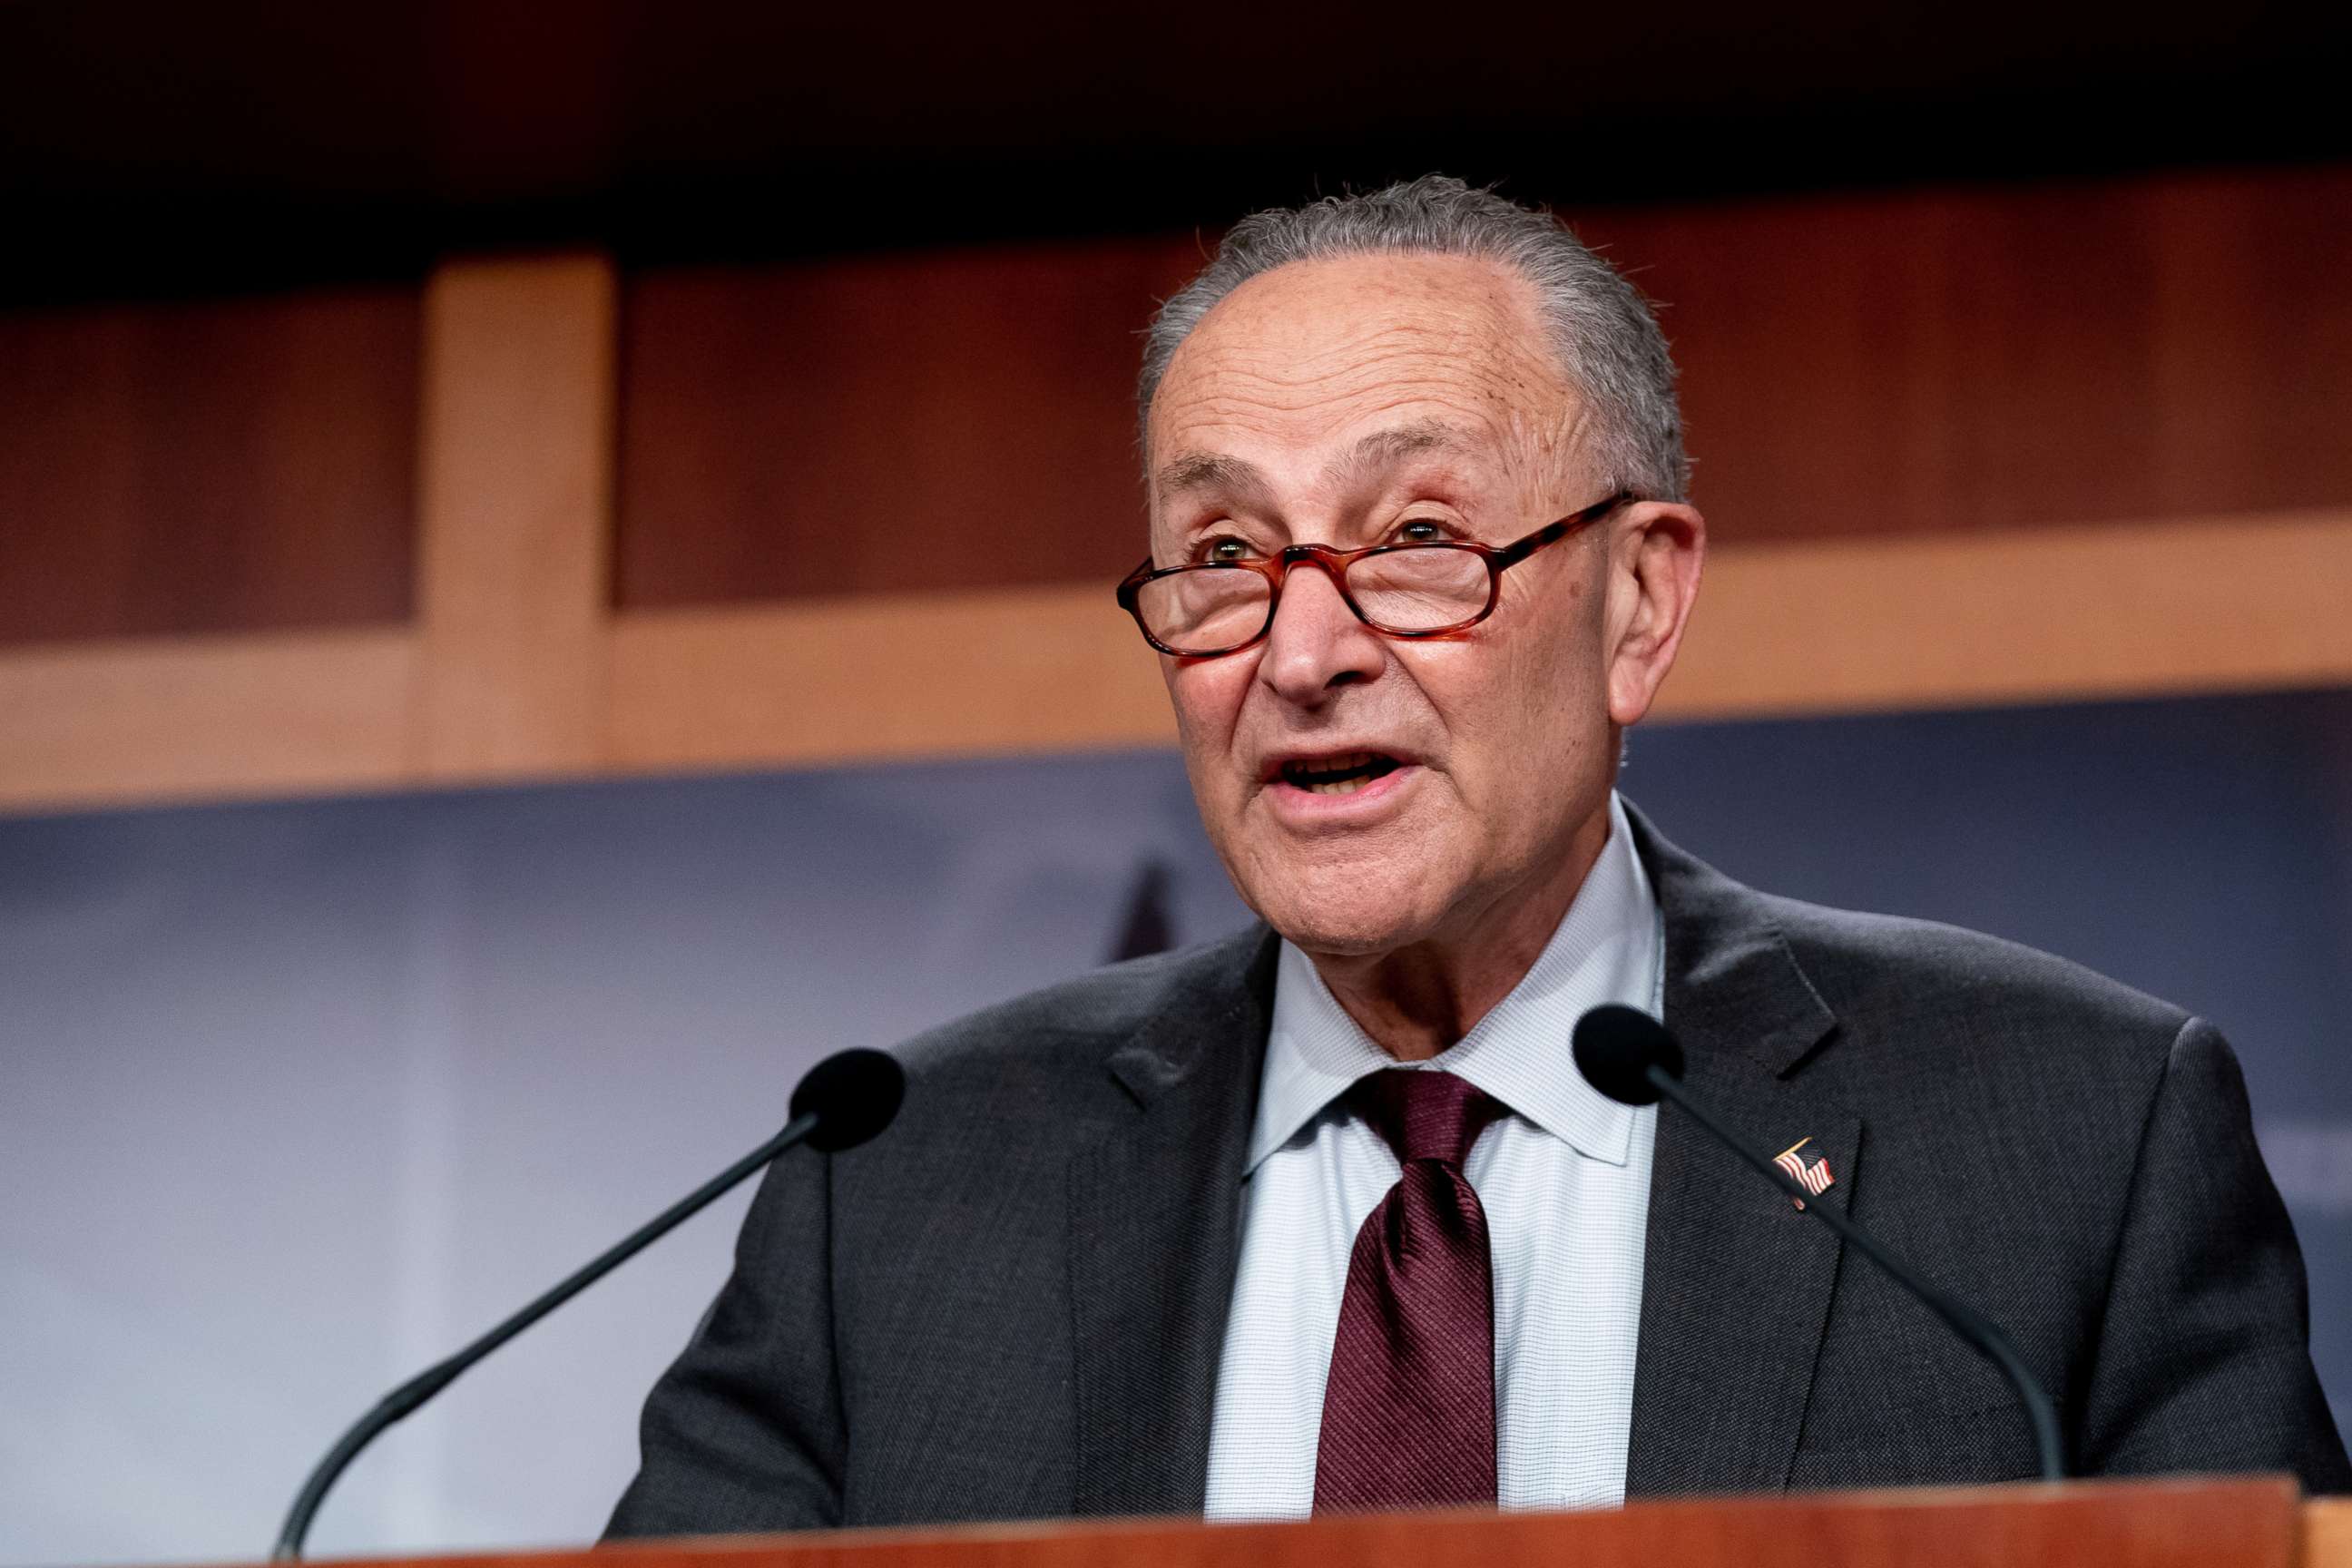 PHOTO: Senate Minority Leader Charles Schumer speaks during a news conference at the U.S. Capitol in Washington, March 23, 2021.